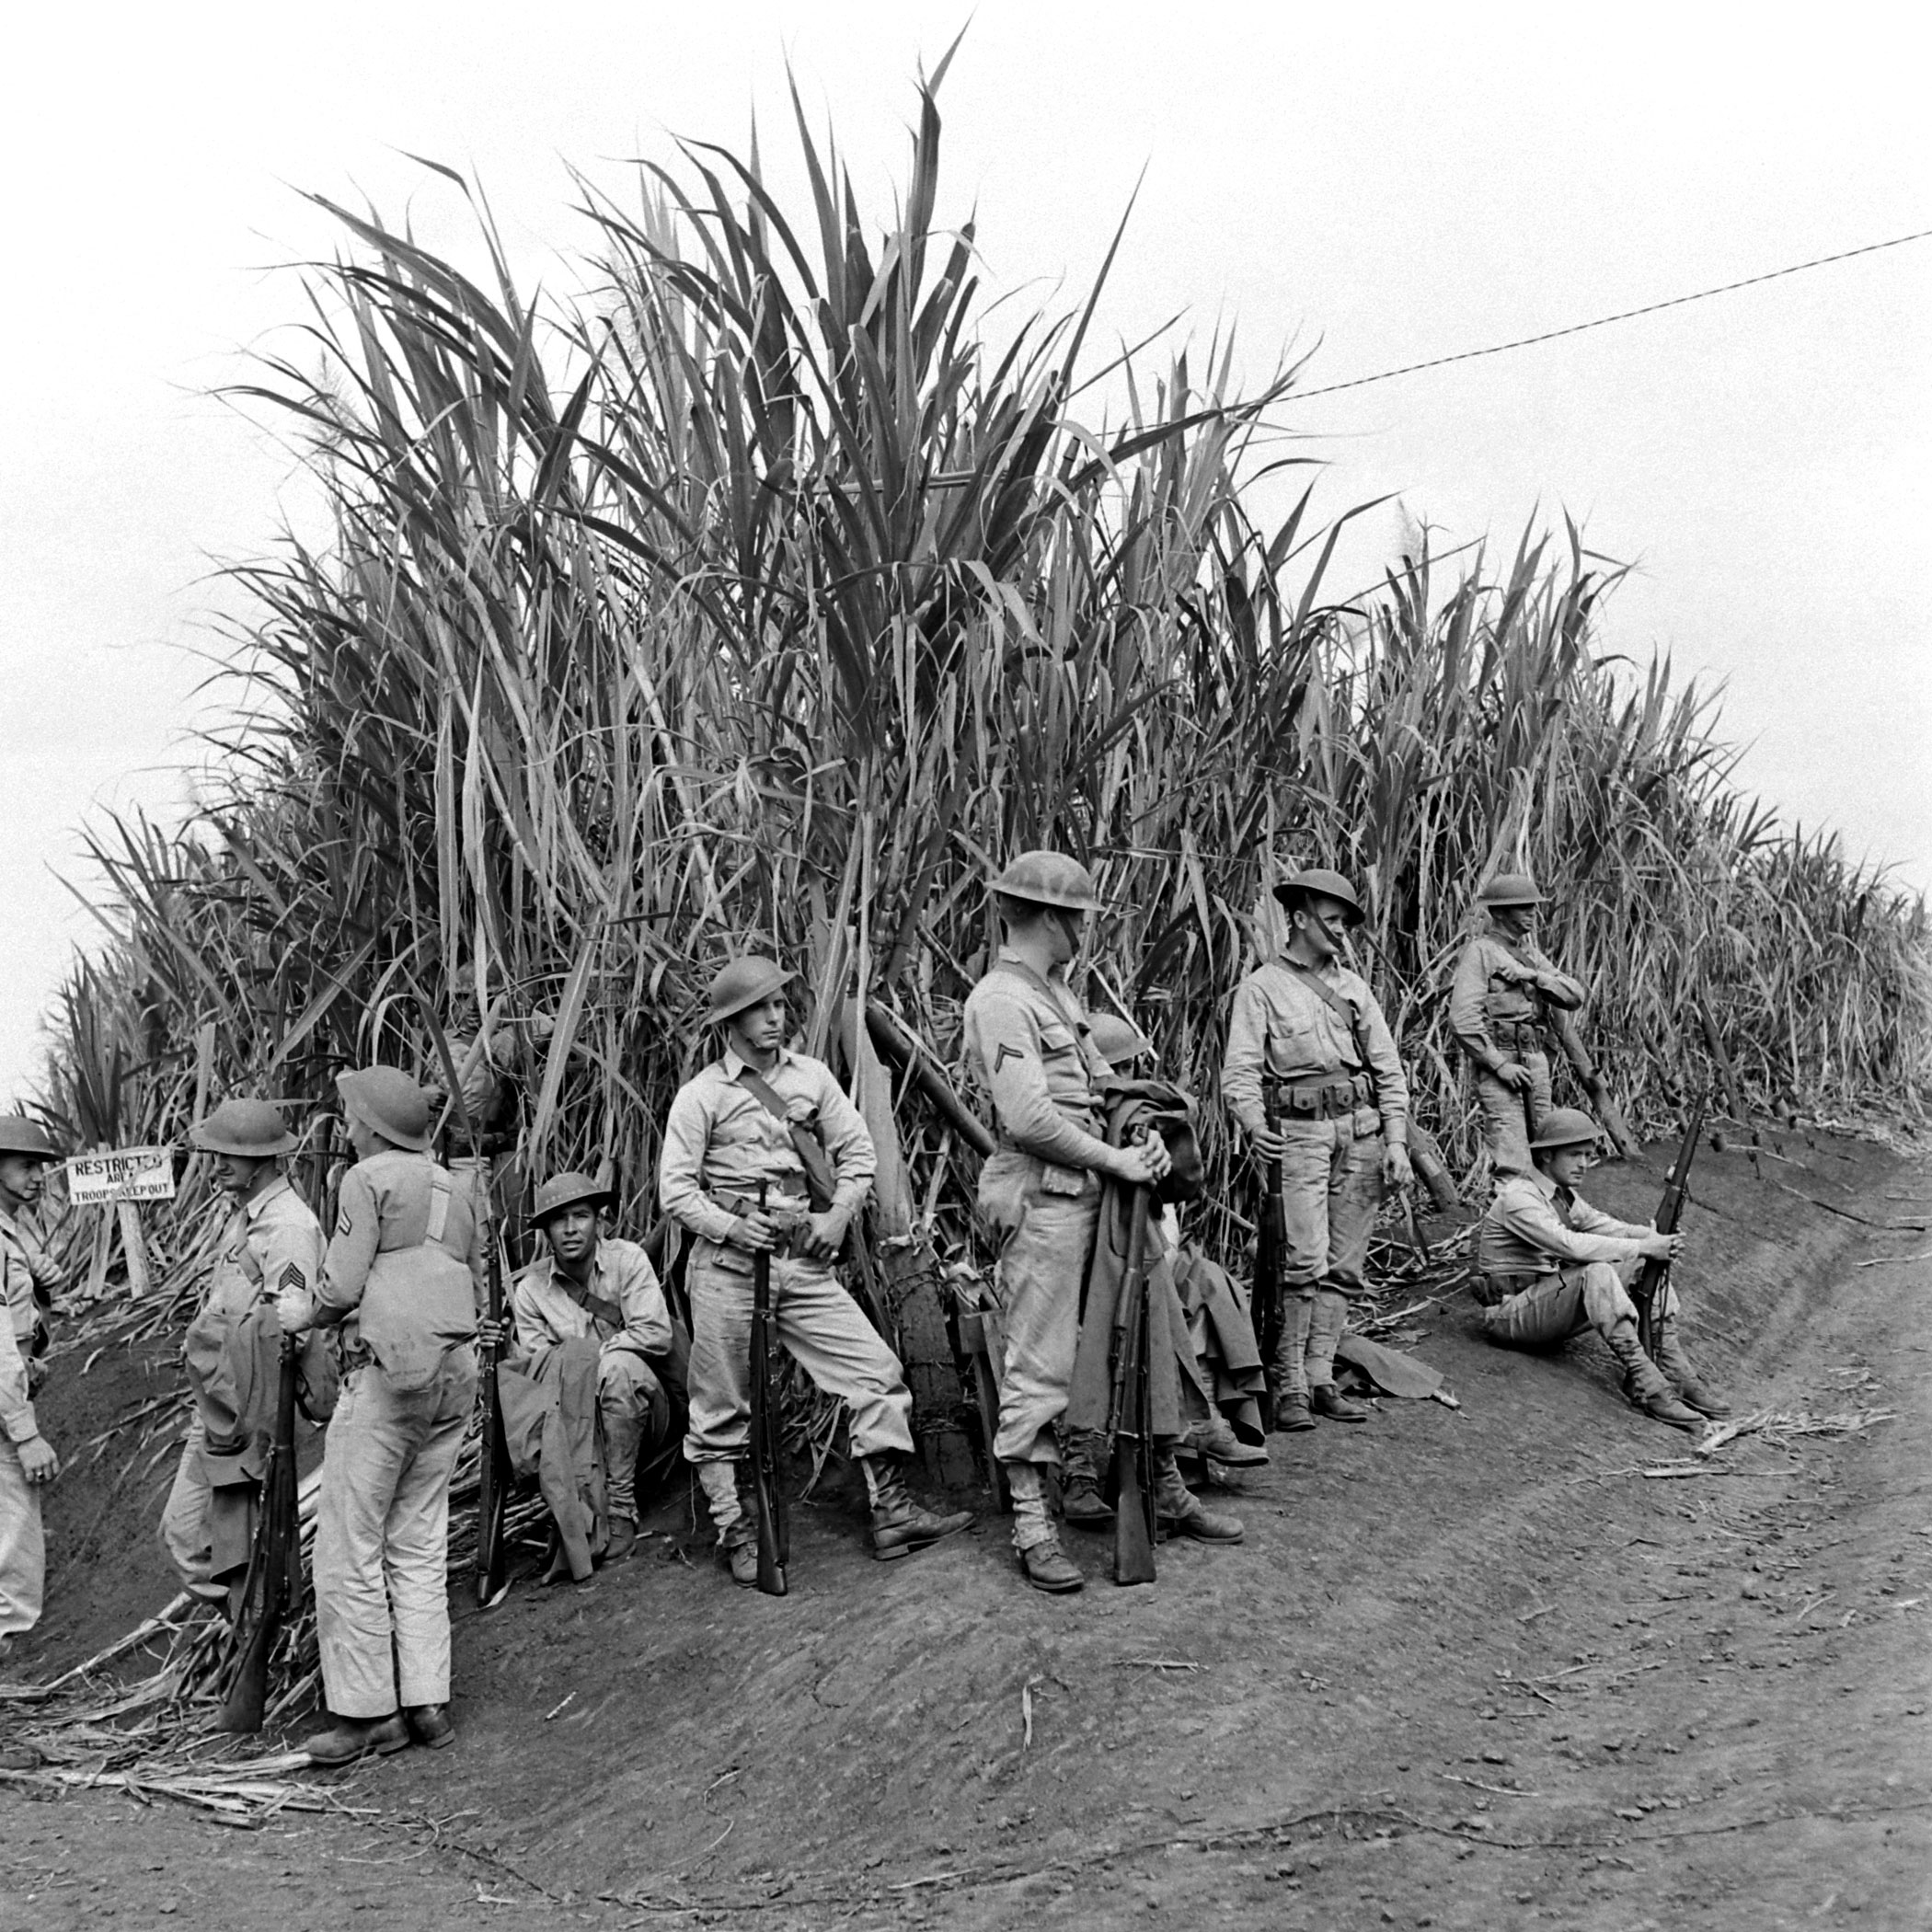 Post-Pearl Harbor training and patrol in Hawaii, early 1942.